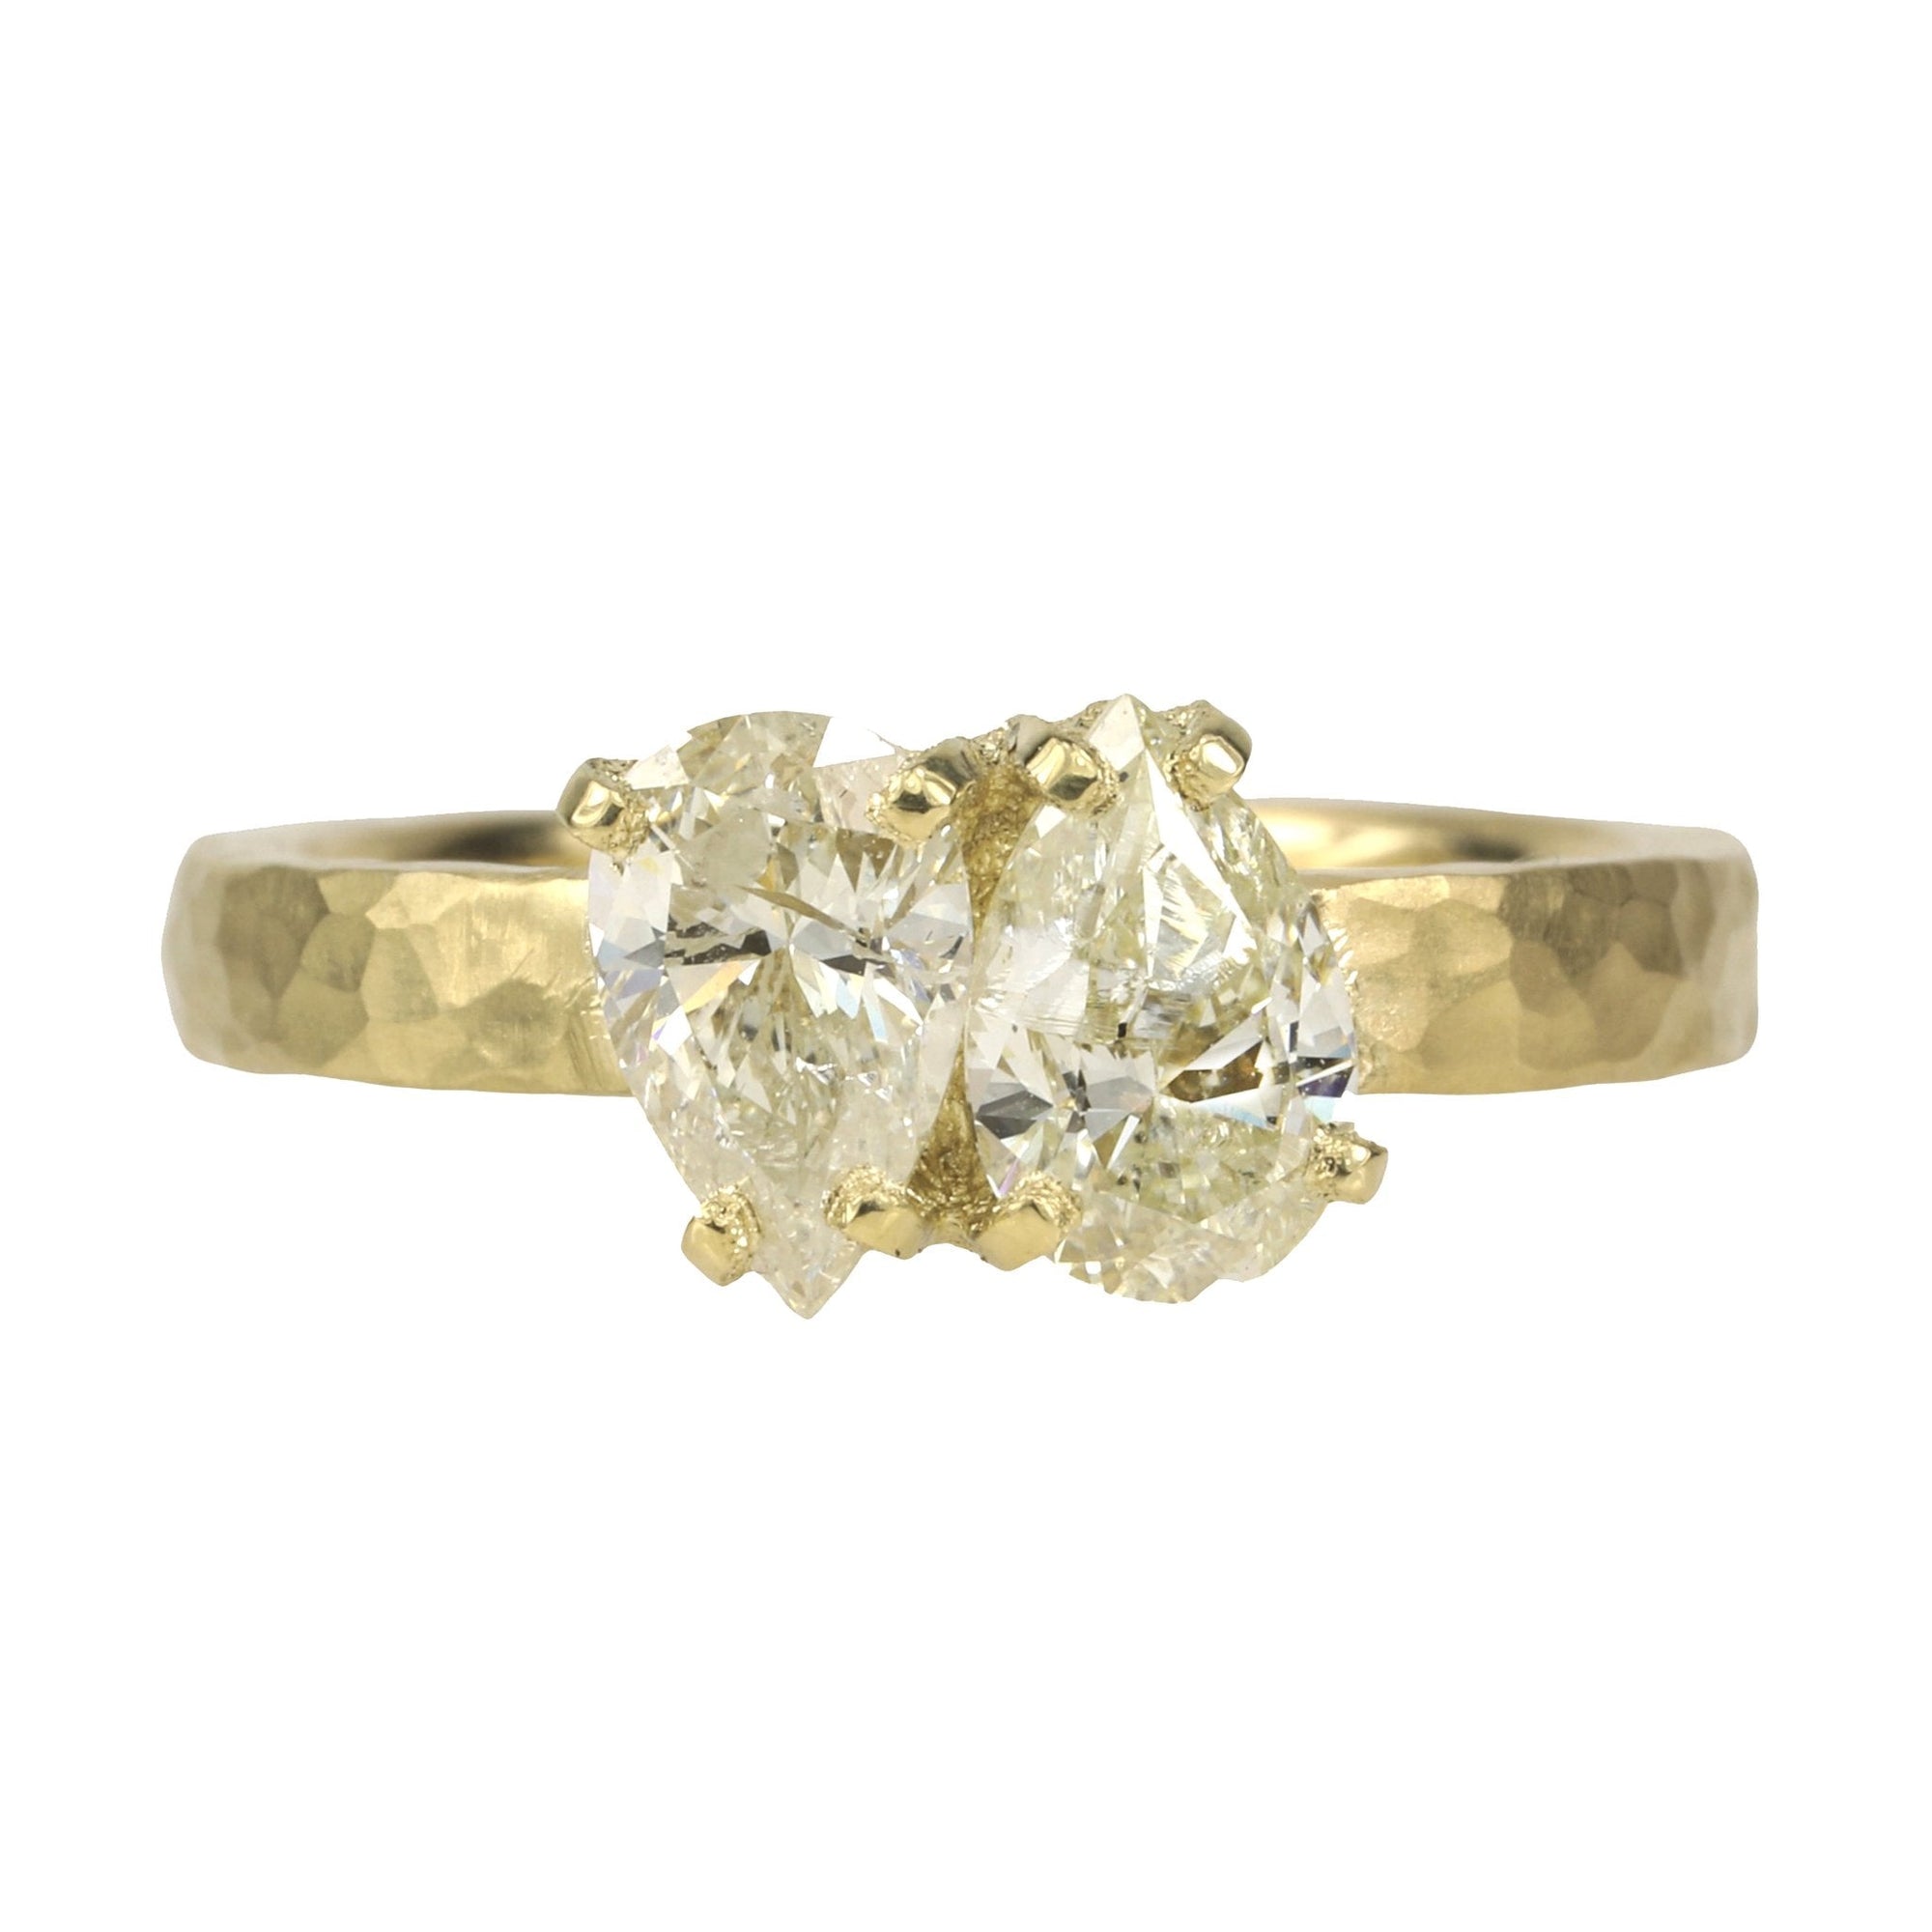 TAP by Todd Pownell 18 Karat Yellow Gold Hammered Band with Two Pear Shaped Diamonds